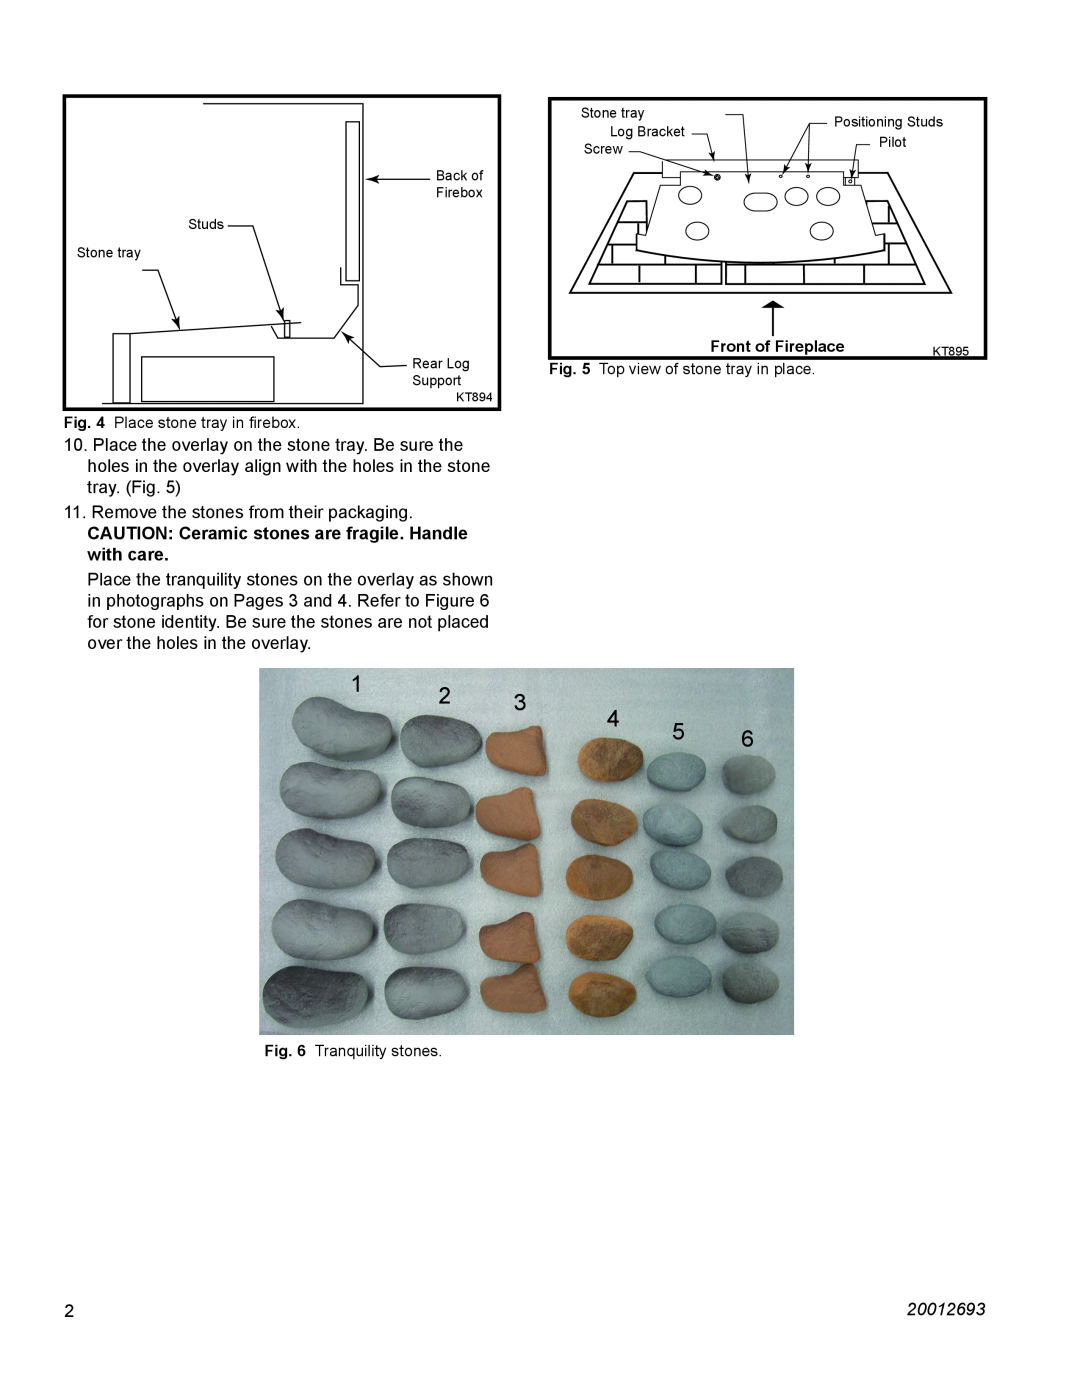 Majestic Appliances TQS36 installation instructions 20012693, Remove the stones from their packaging 